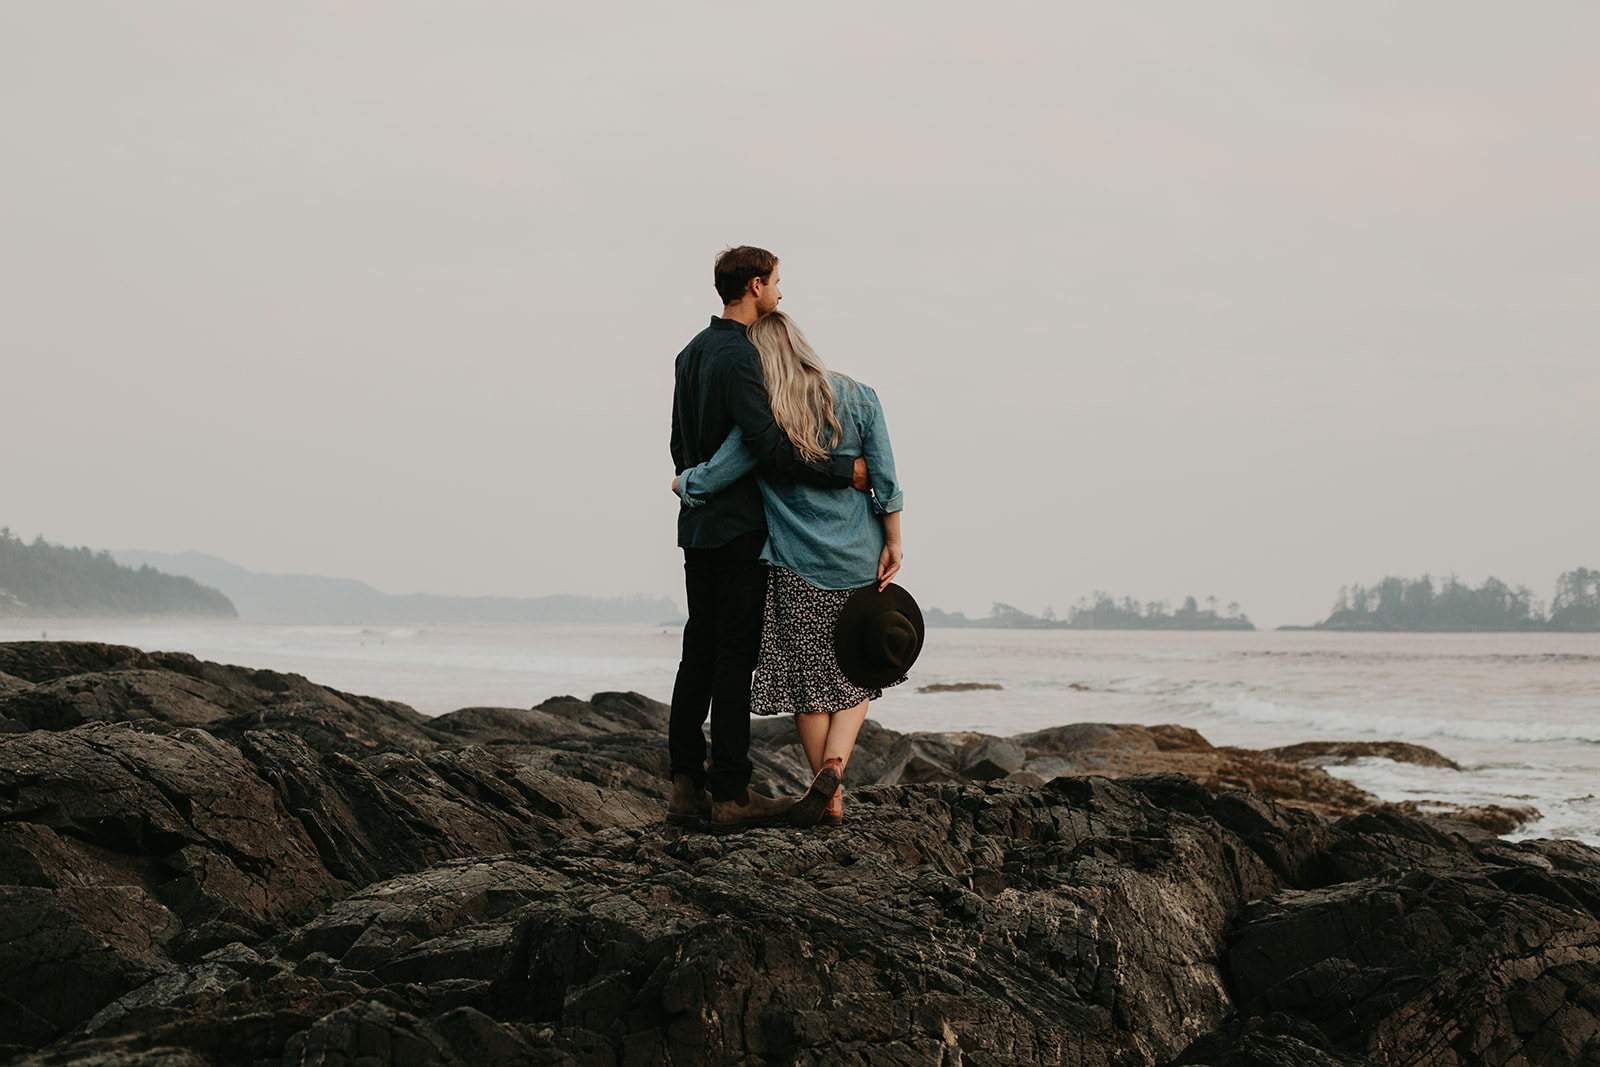 6 Tips All About Choosing Outfits For Your Engagement Session - Courtney Jess featured on Bronte Bride